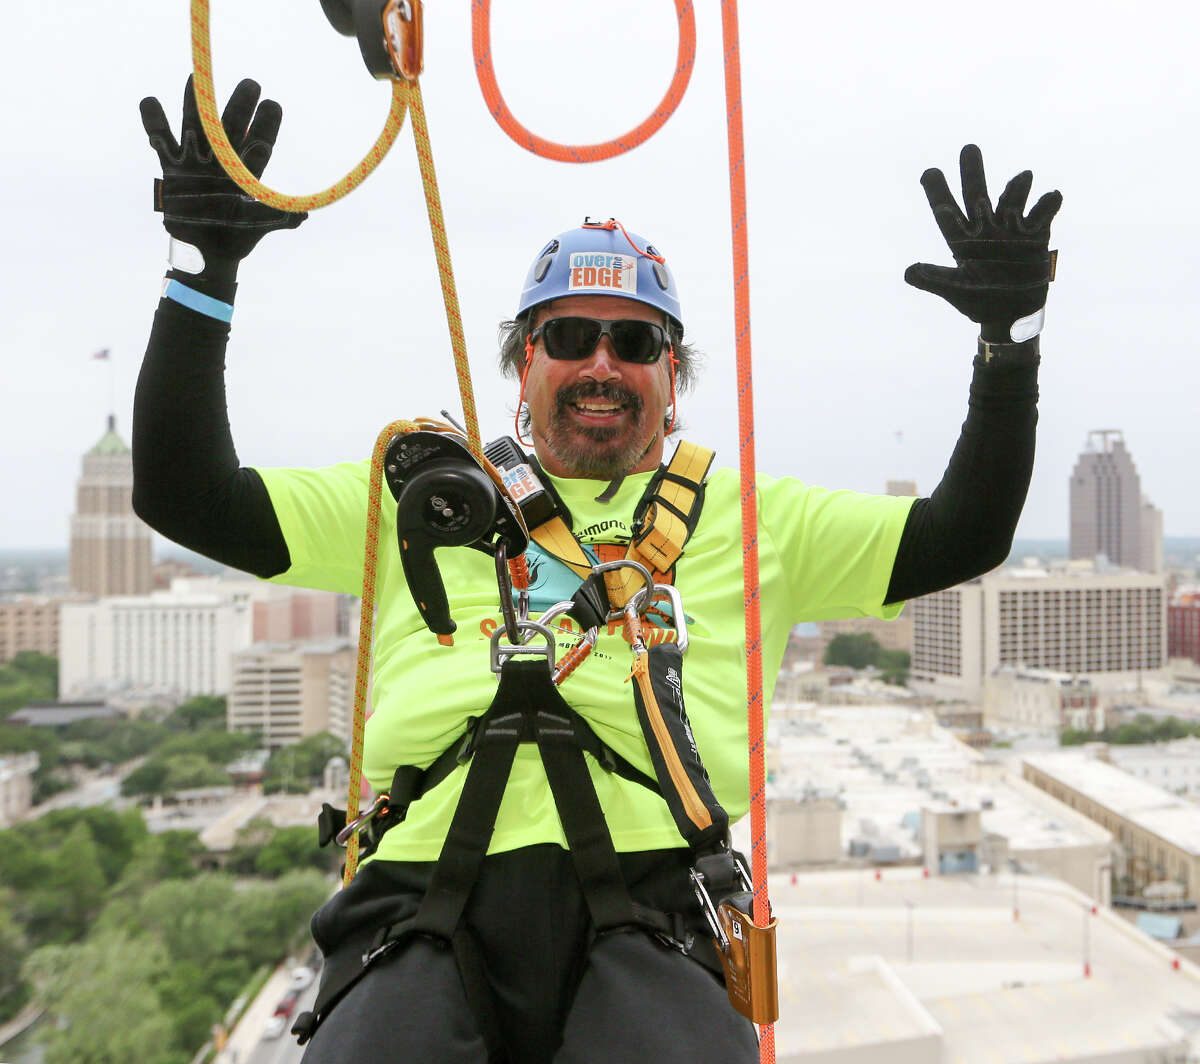 Rick Castillo goes "hands free" before rappeling from the 19th floor of the Marriott Rivercenter, 100 Bowie St. in Boysville, Inc.'s "Over the Edge" fundraising event on Saturday, April 7, 2018. MARVIN PFEIFFER/mpfeiffer@express-news.net